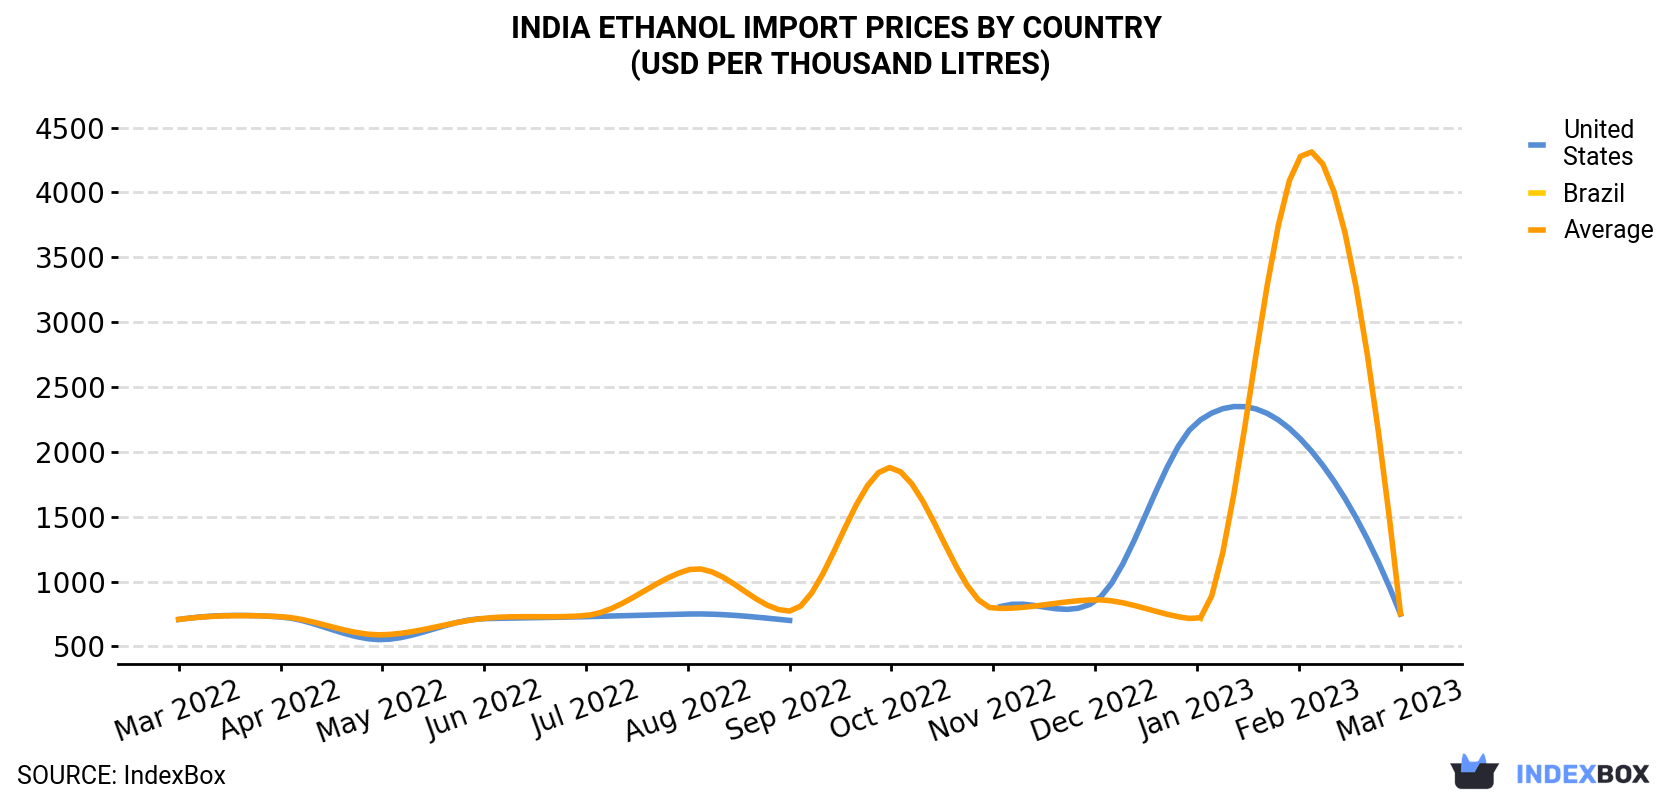 India Ethanol Import Prices By Country (USD Per Thousand Litres)